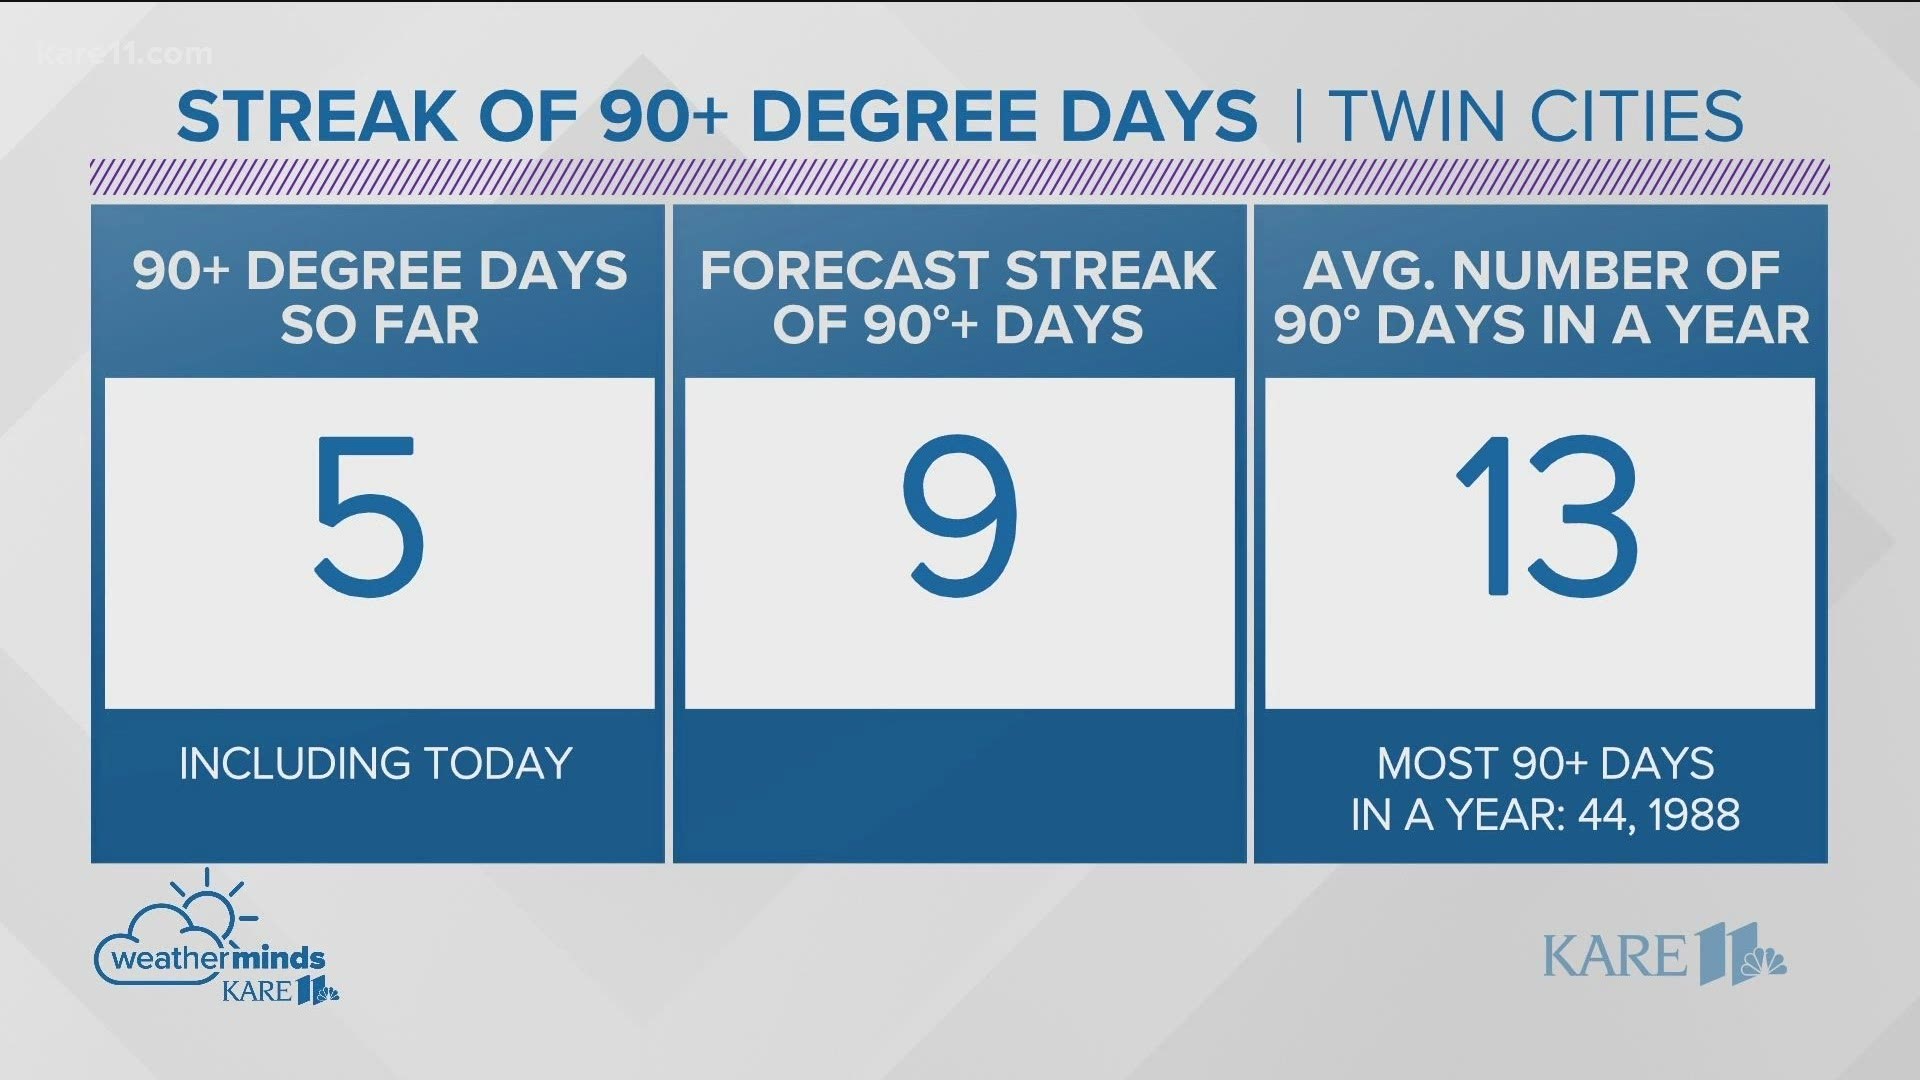 Including today, this stretch of 90-plus degree days is at five. By Friday, it should mark nine days in a row at 90-plus degrees.